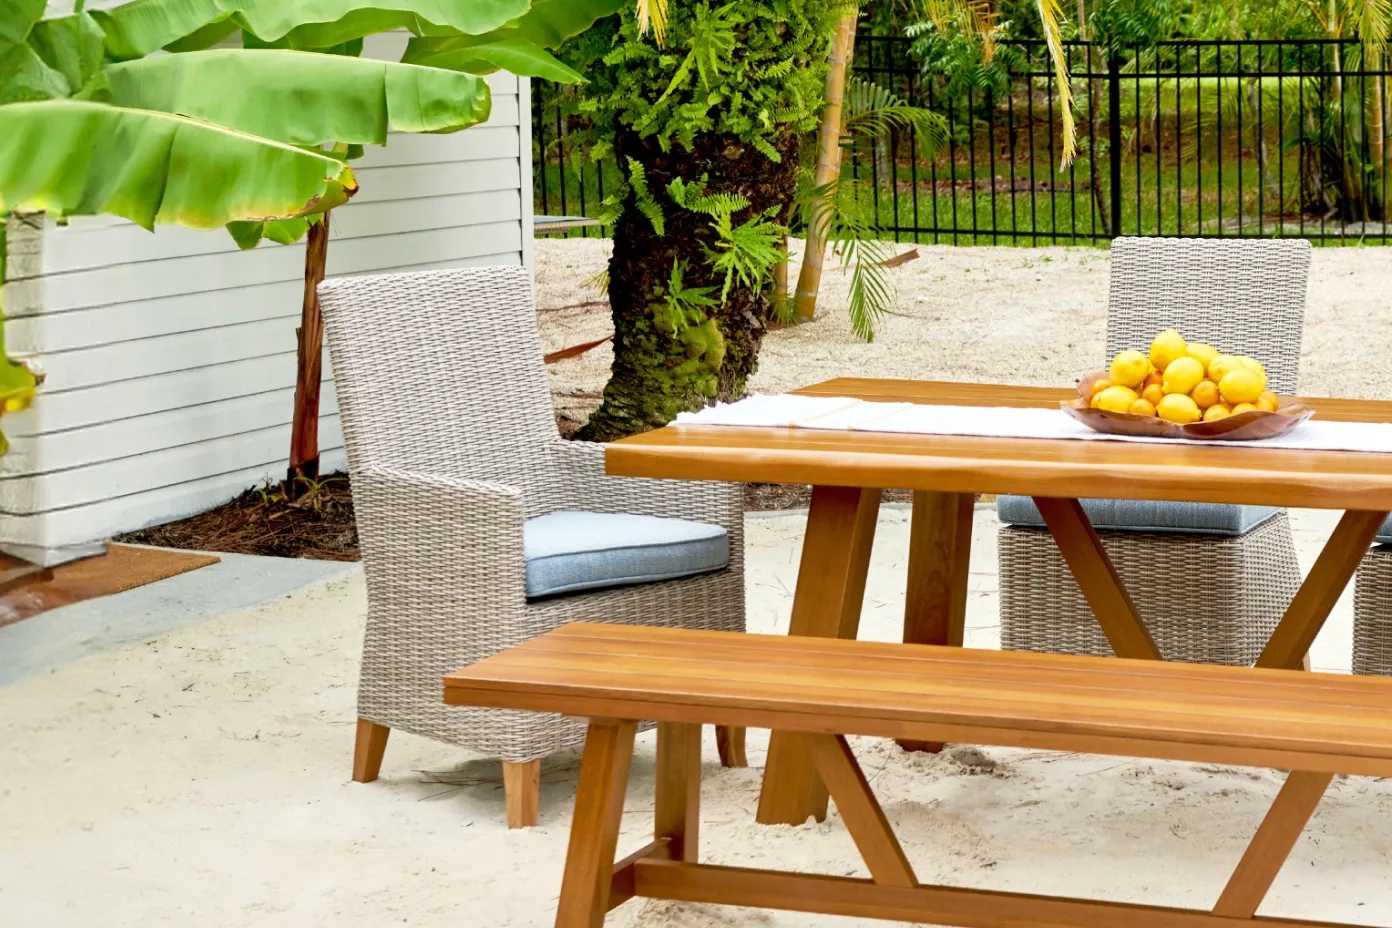 How to Decorate with Wicker and White Patio Furniture